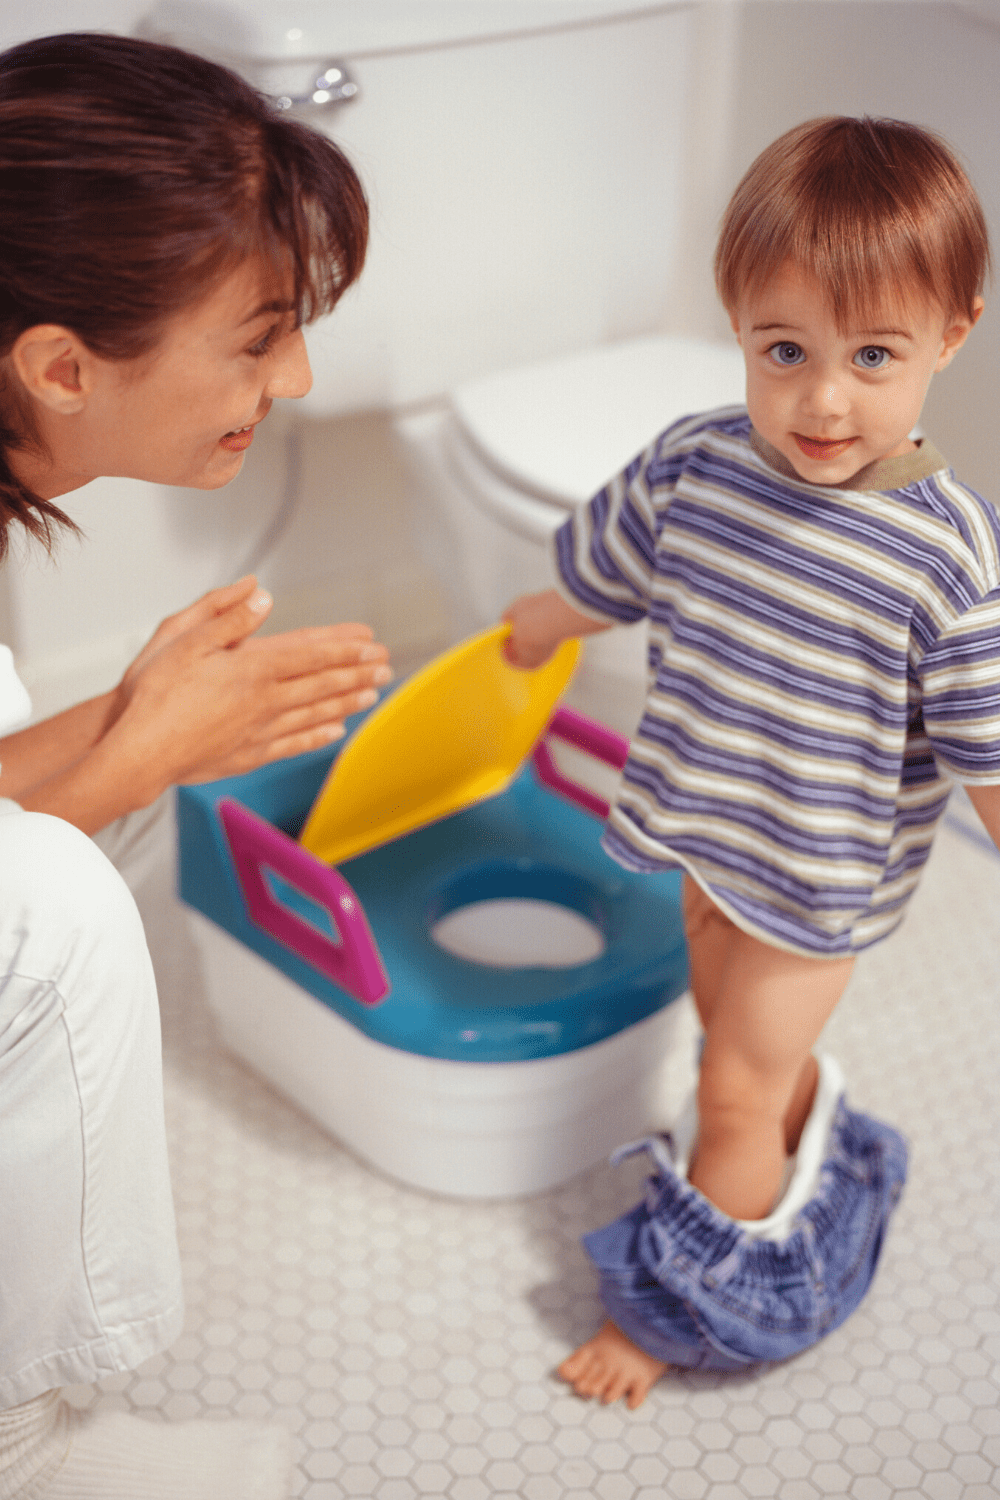 5 Tips to Gently Potty Train Your Toddler